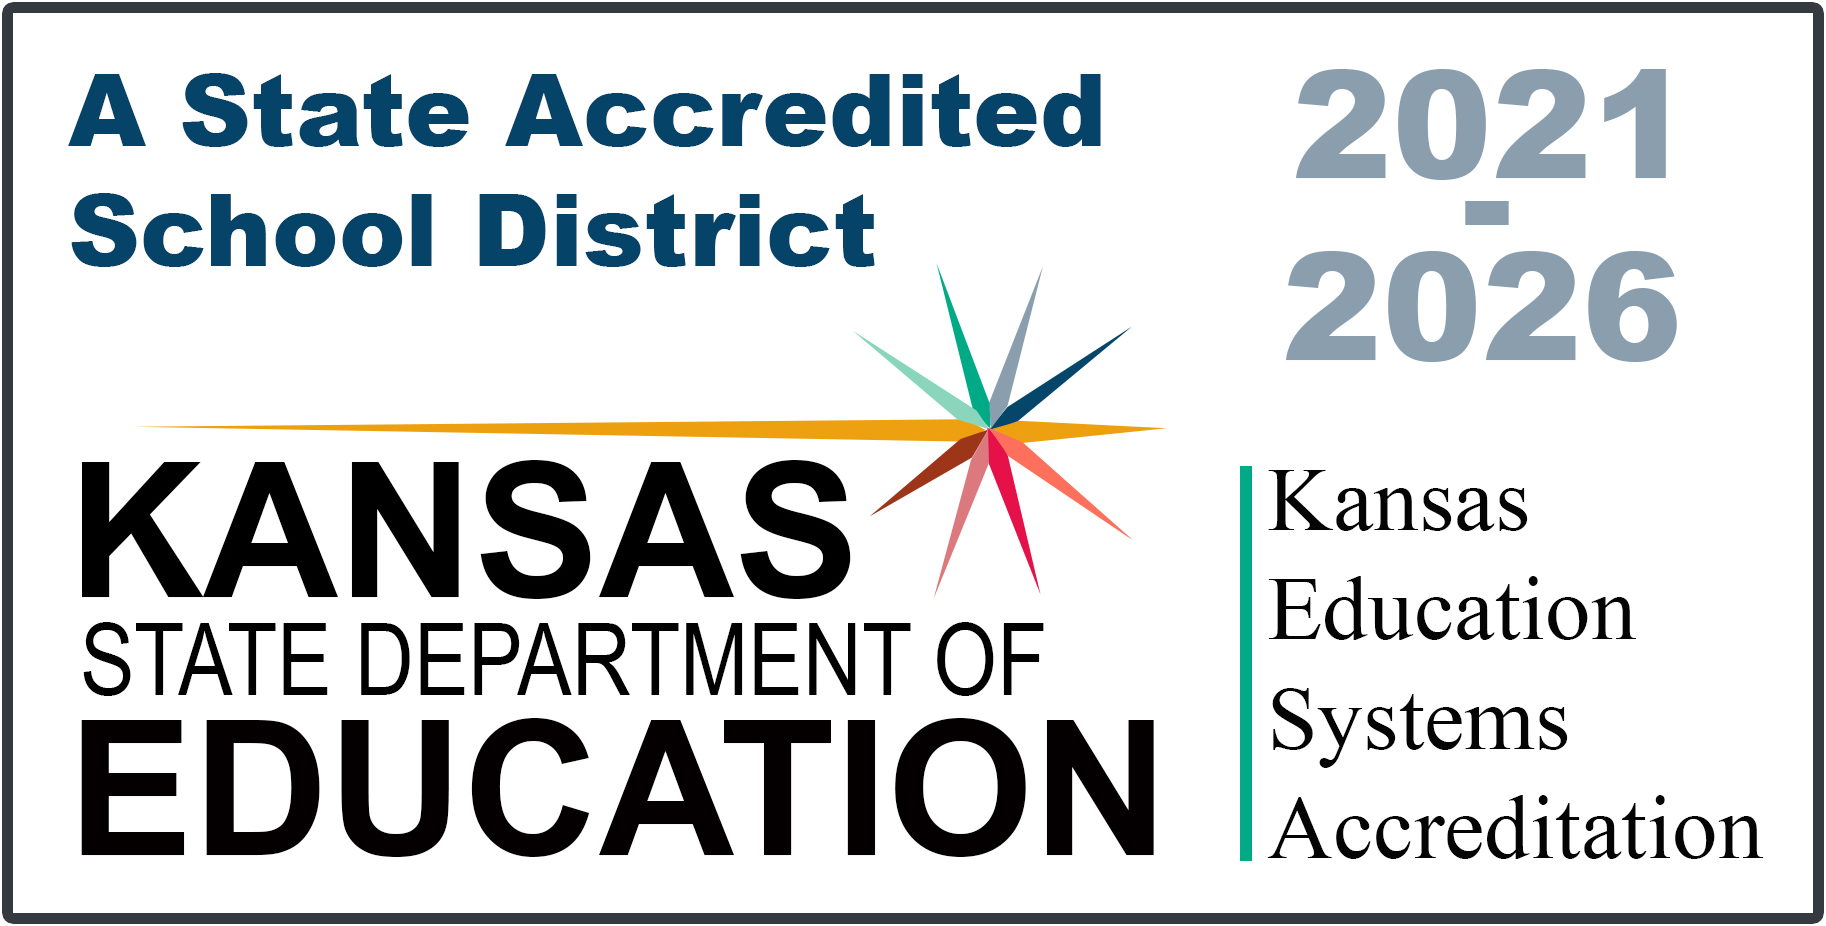 A State Accredited School District